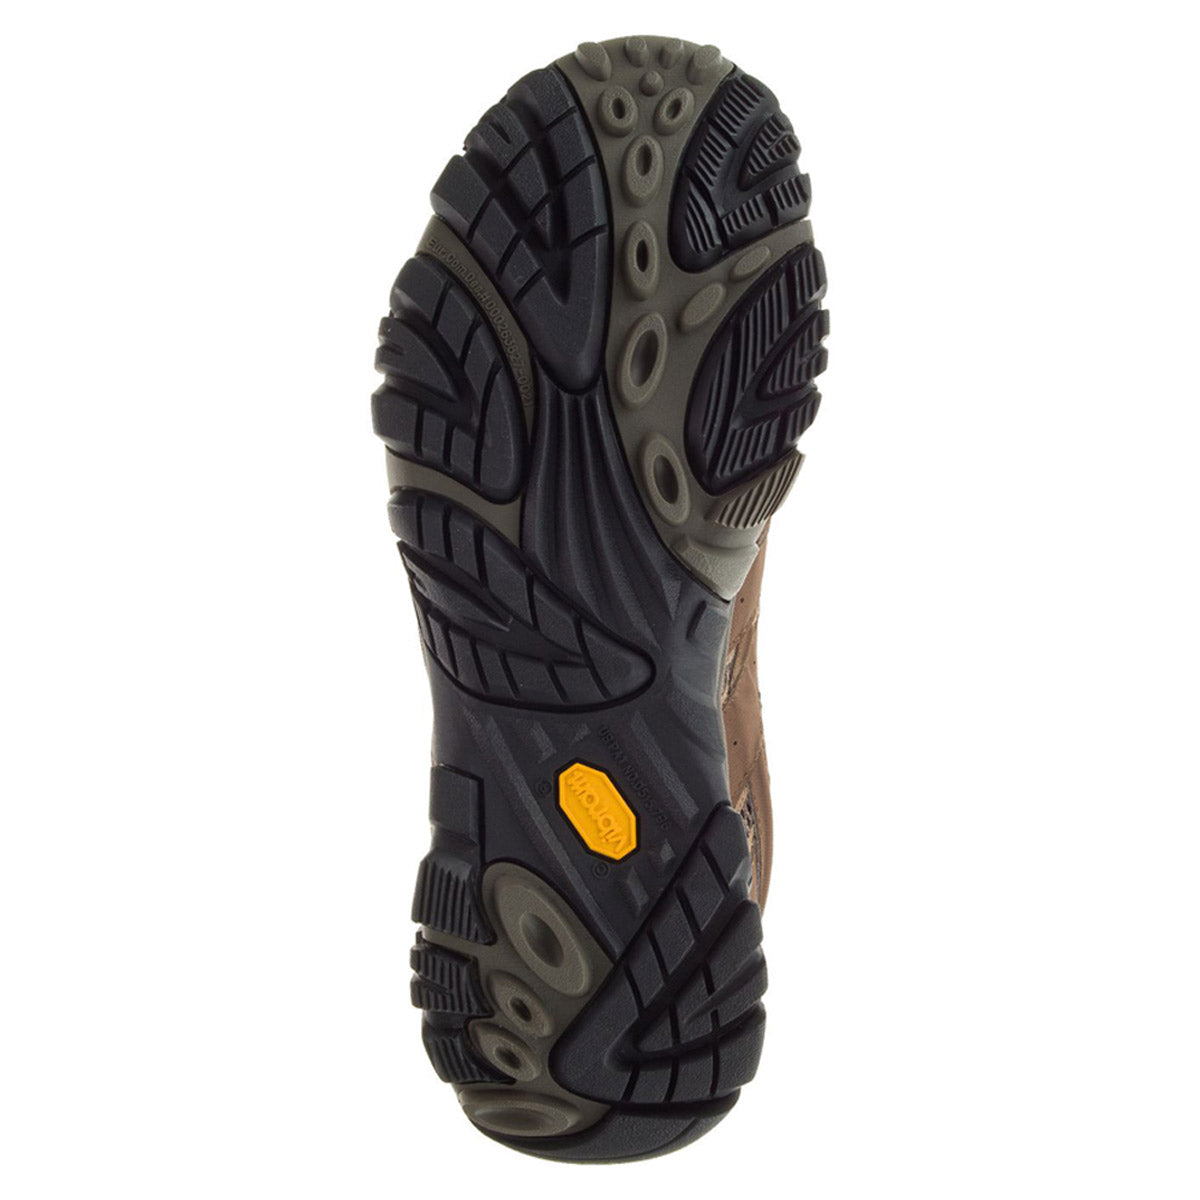 A close-up view of the tread pattern on the sole of a hiking boot, featuring Merrell Vibram traction.